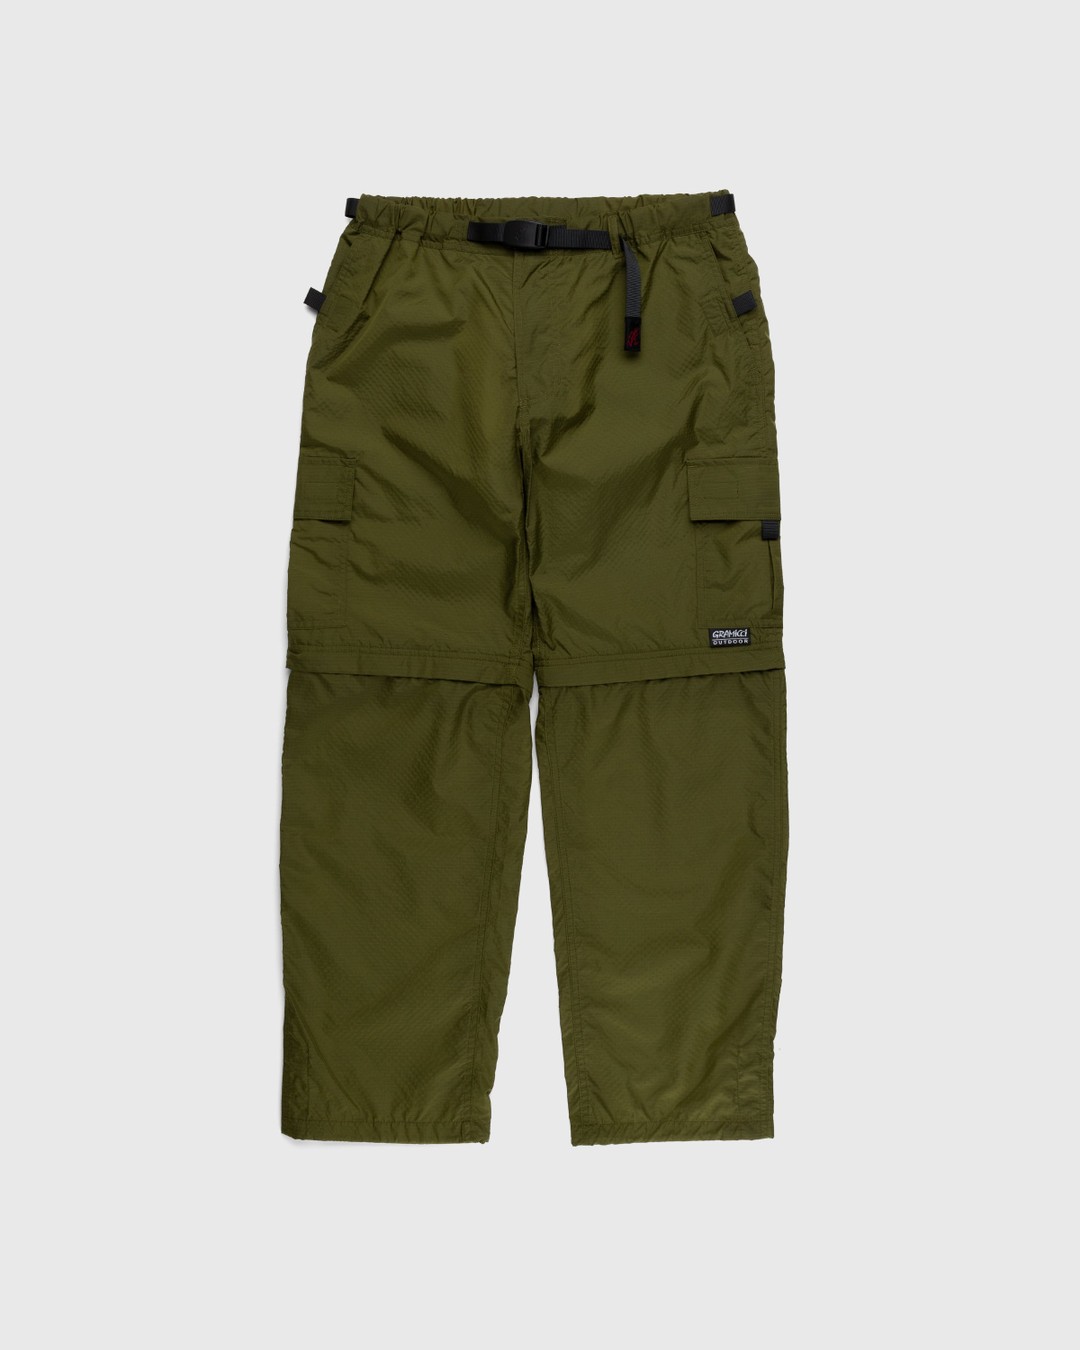 Gramicci – Utility Zip-Off Cargo Pant Army Green - Cargo Pants - Green - Image 2